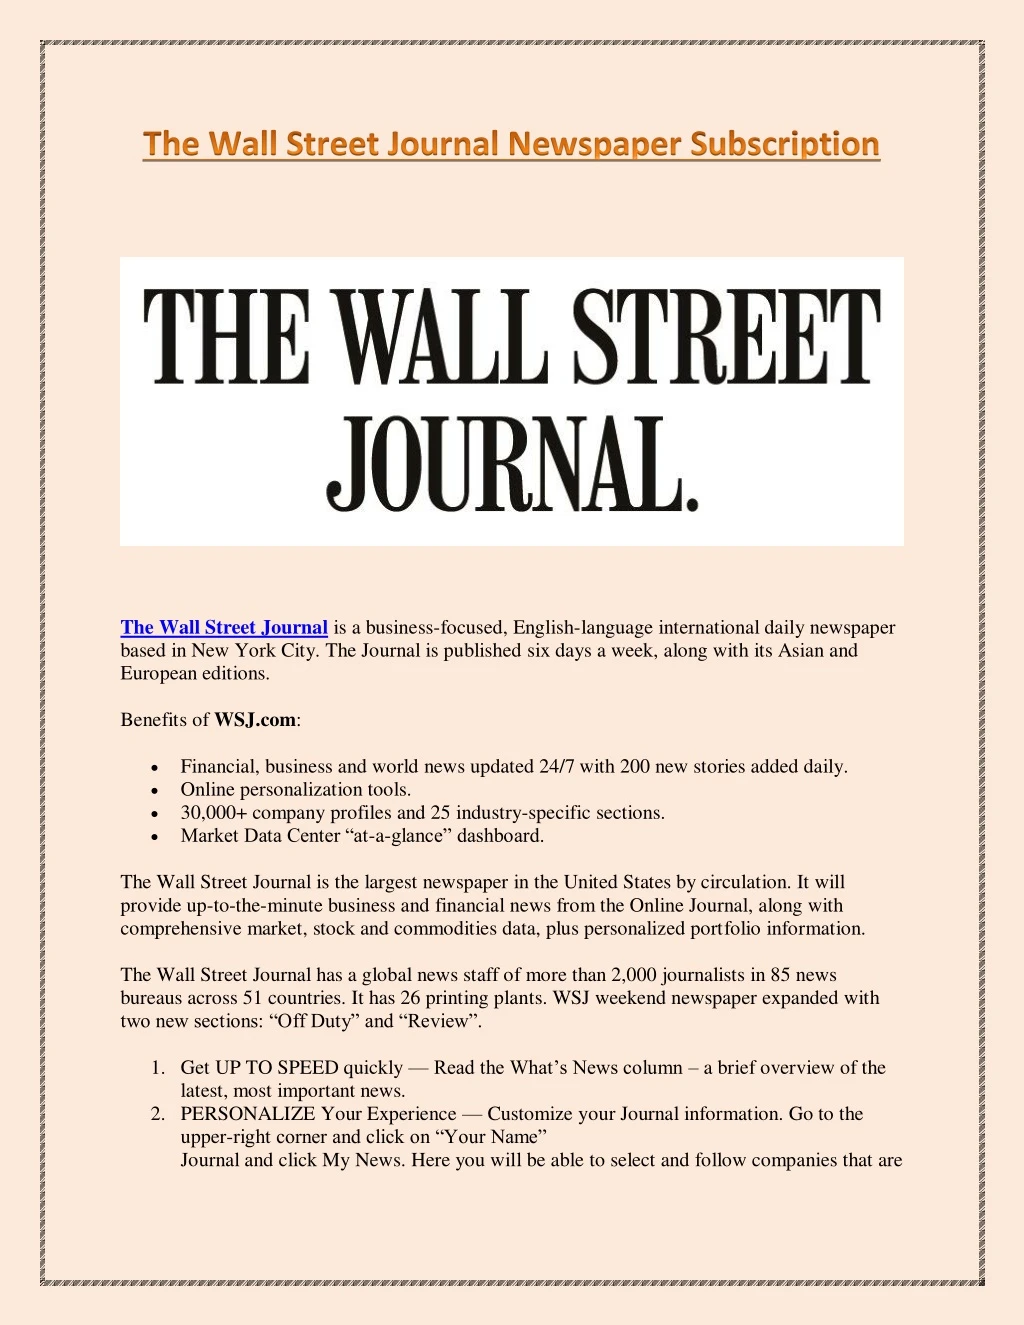 the wall street journal is a business focused